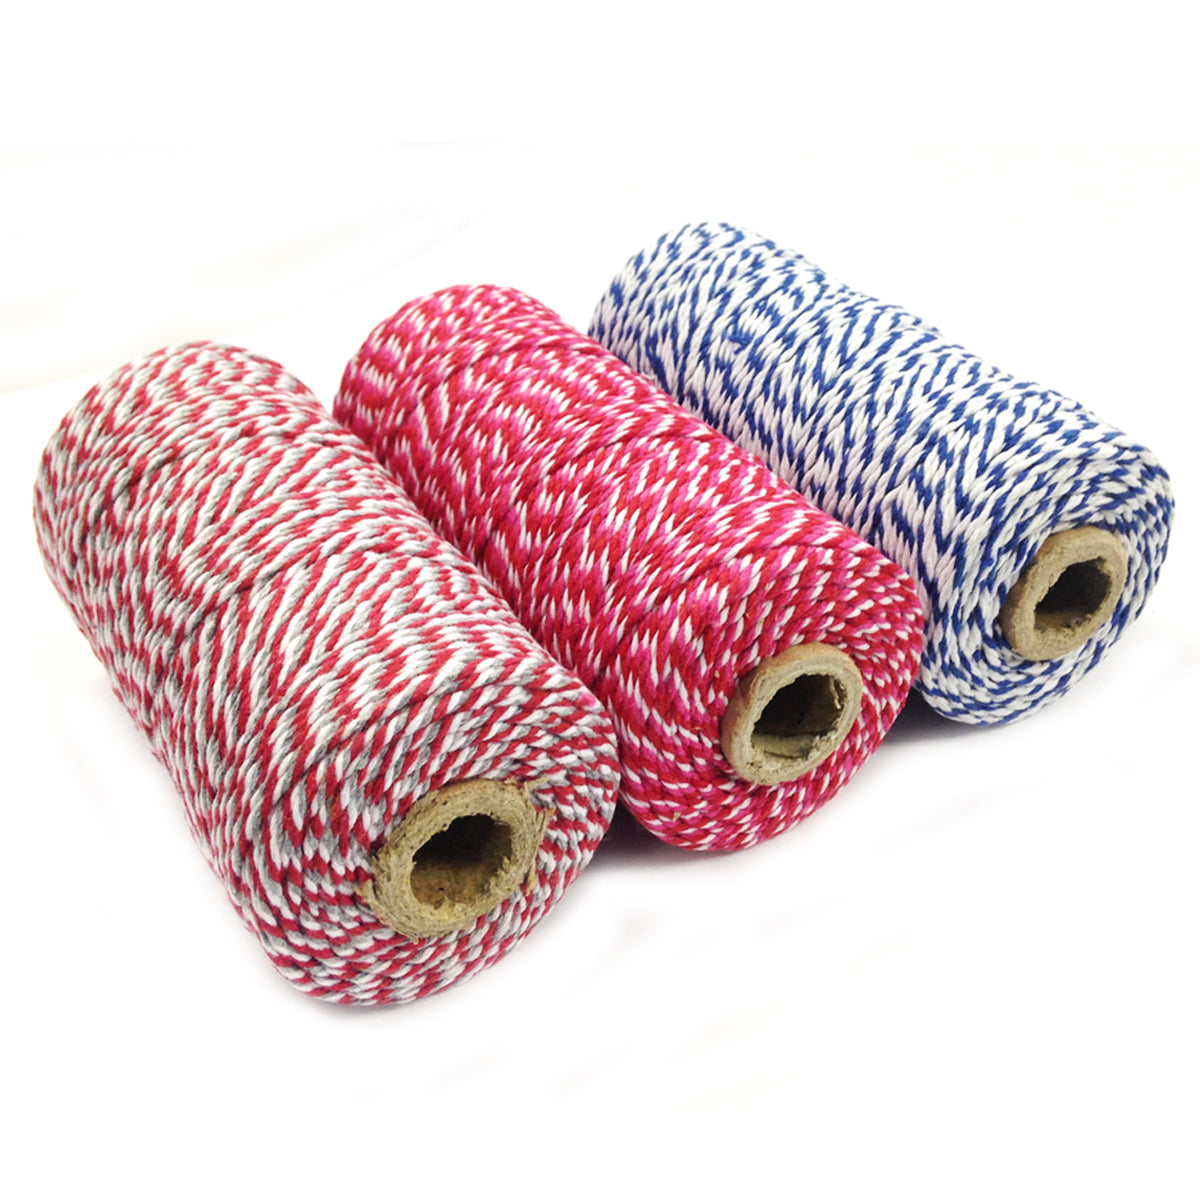 Wrapables Cotton Baker's Twine 12ply 330 Yards (Set of 3 Spools x 110 Yards)